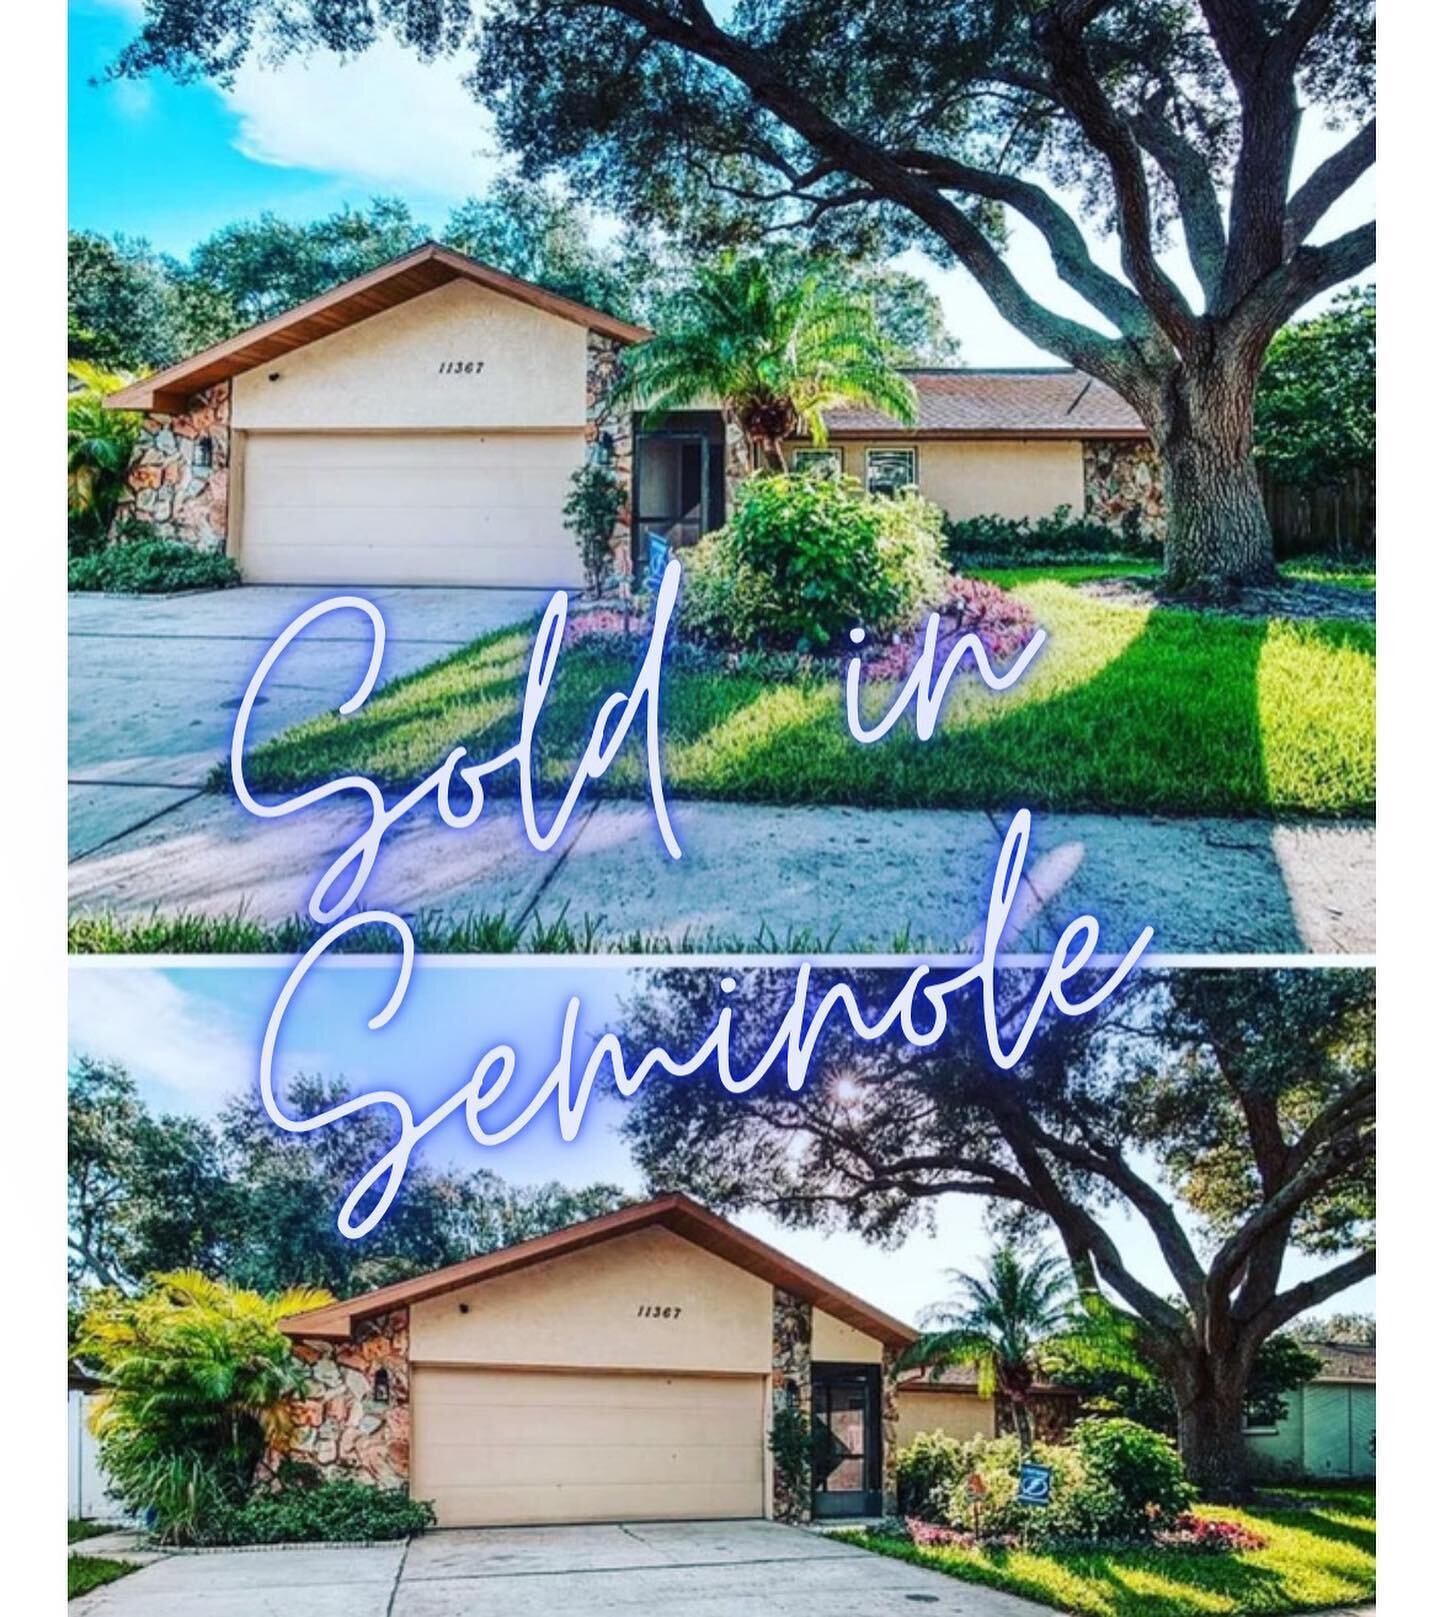 SOLD, SOLD, &amp; SOLD. That&rsquo;s a wrap for 2021. I can&rsquo;t wait to sell for you in 2022. #realtor #floridarealestate #tampabay #stpete #clearwater #clearwaterbeach #seminole #pro  DM me if you are ready to buy or sell!